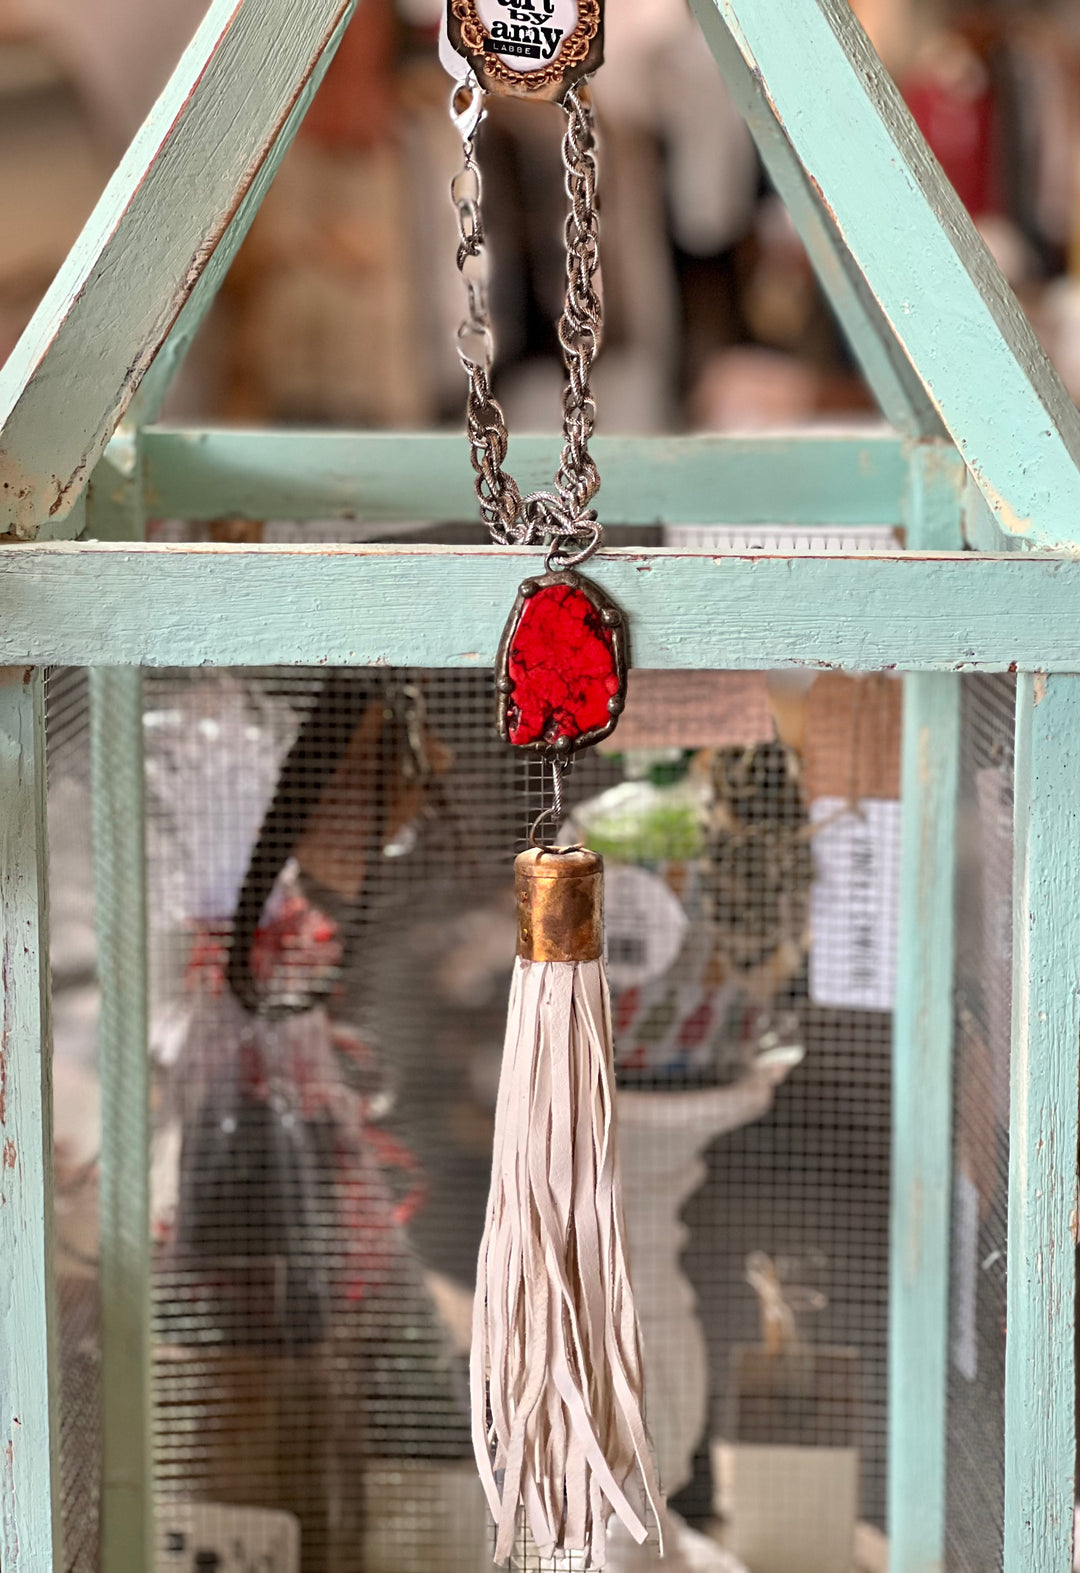 Large 22" Looped Chain Necklace w/Red Stone and Large Cream Leather Tassel